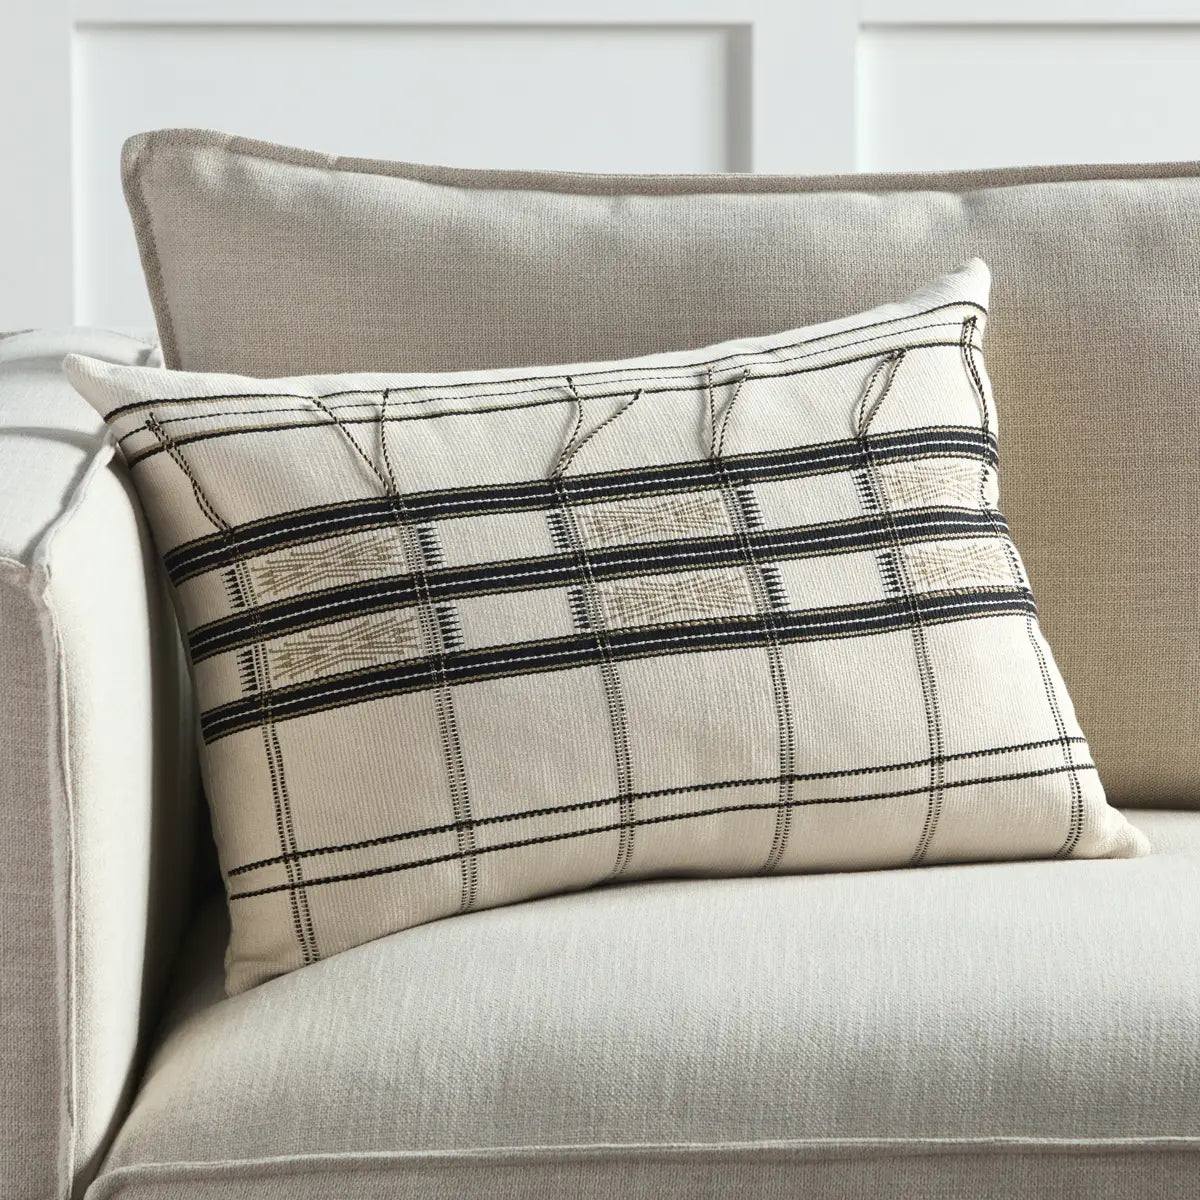 The Nagaland Merima Pillow showcases the traditional loin-loom techniques of the indigenous tribes of the region. The artisan-made Merima throw pillow effortlessly combines heritage-rich tribal and stripe patterns with a versatile black, cream, and tan colorway for a stunning statement in any space. Amethyst Home provides interior design services, furniture, rugs, and lighting in the Miami metro area.